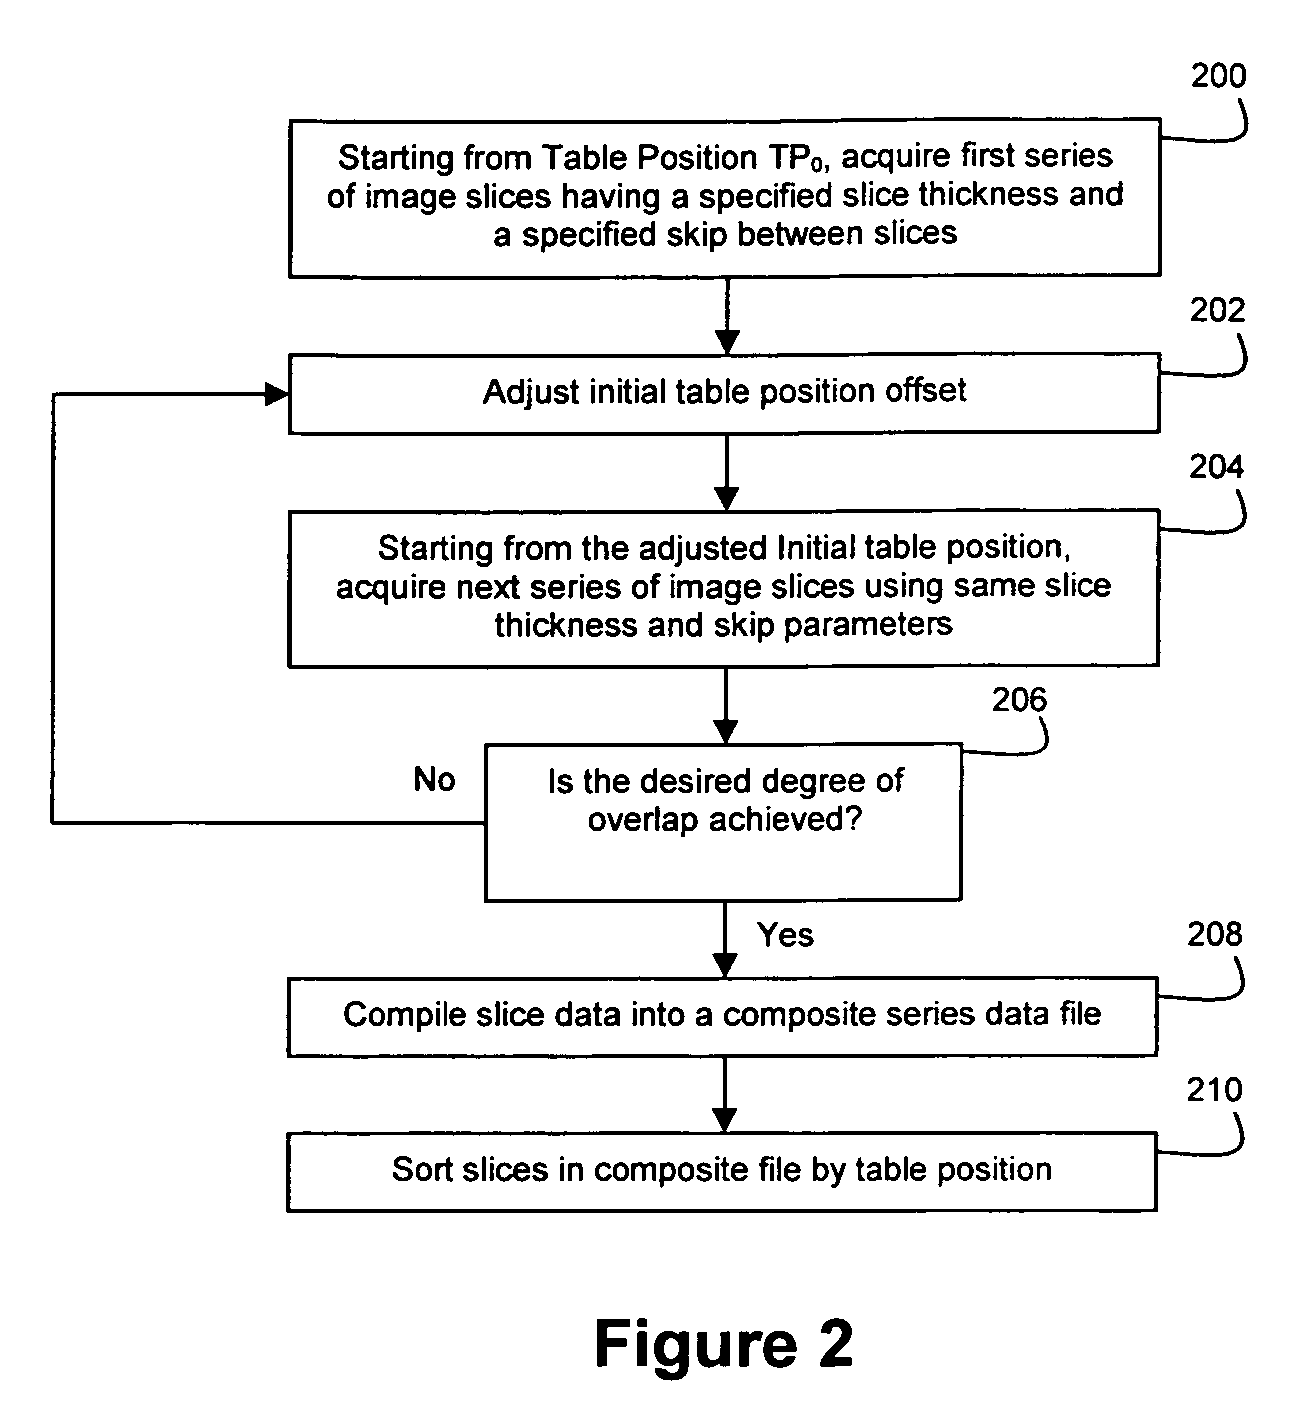 Method and apparatus for acquiring overlapped medical image slices